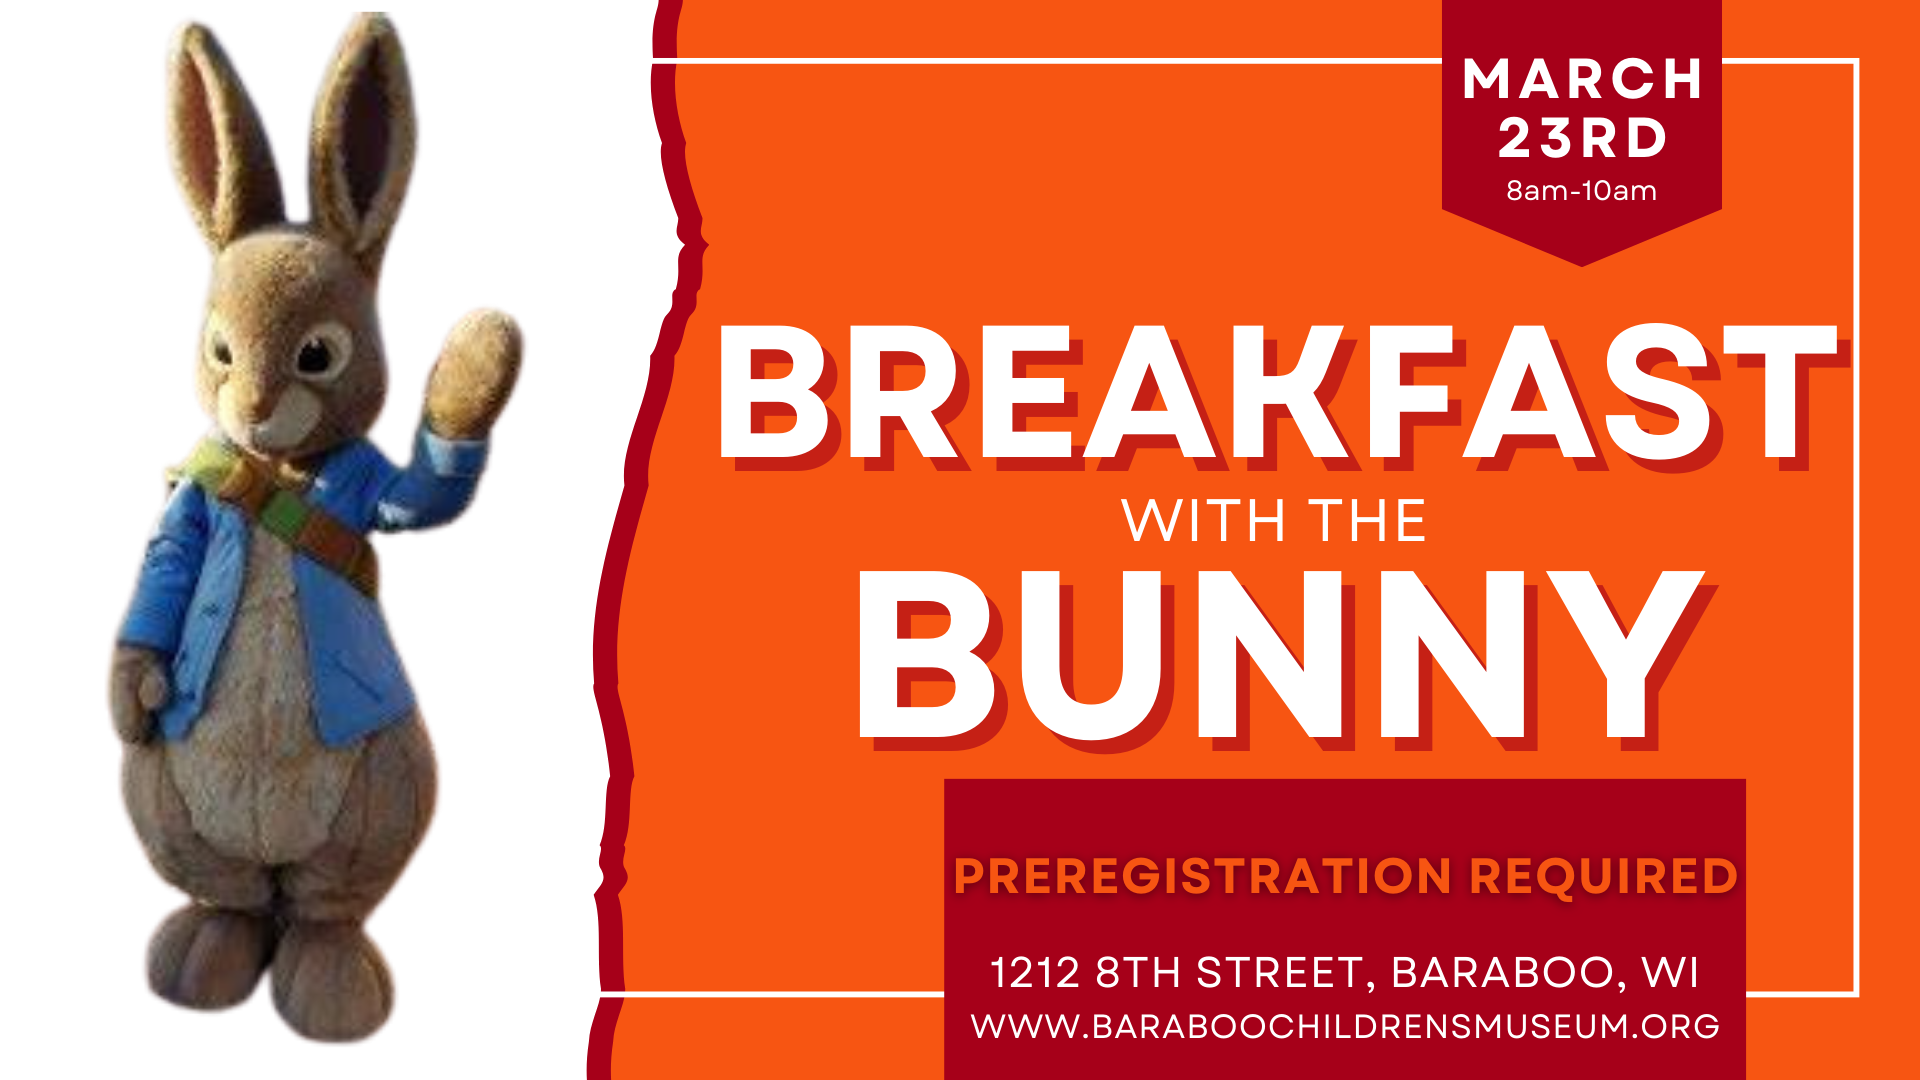 Breakfast with the Bunny event flyer